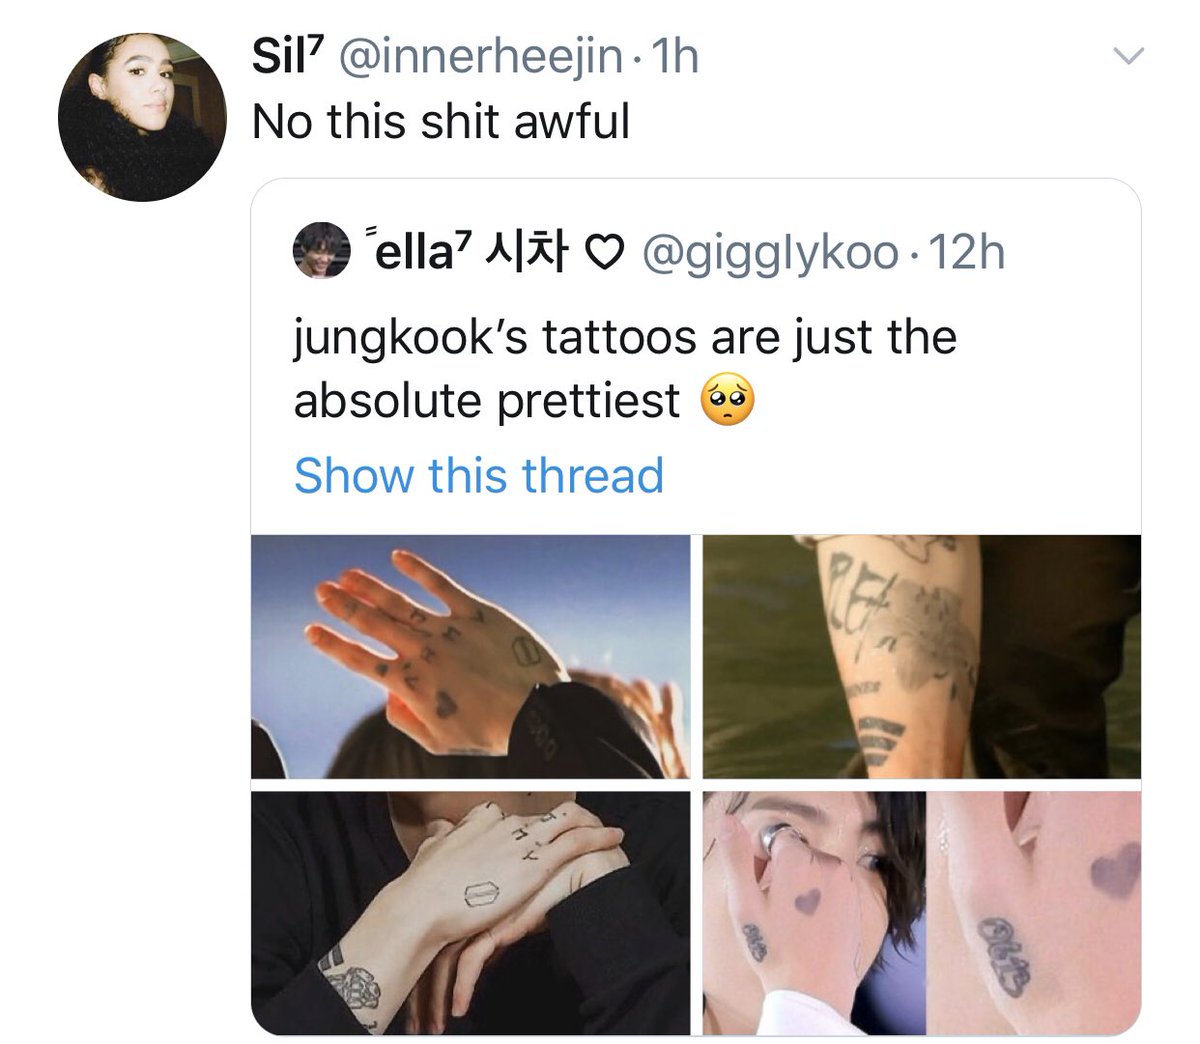 MASS REPORT ALL THESE ACCOUNTS M*CKING HIS TATTOOS. These kind of people one of the million reasons why he has been in-active from social media.  https://twitter.com/minyoongista  https://twitter.com/kanekikoon  https://twitter.com/AnsTmfRl  https://twitter.com/innerheejin 